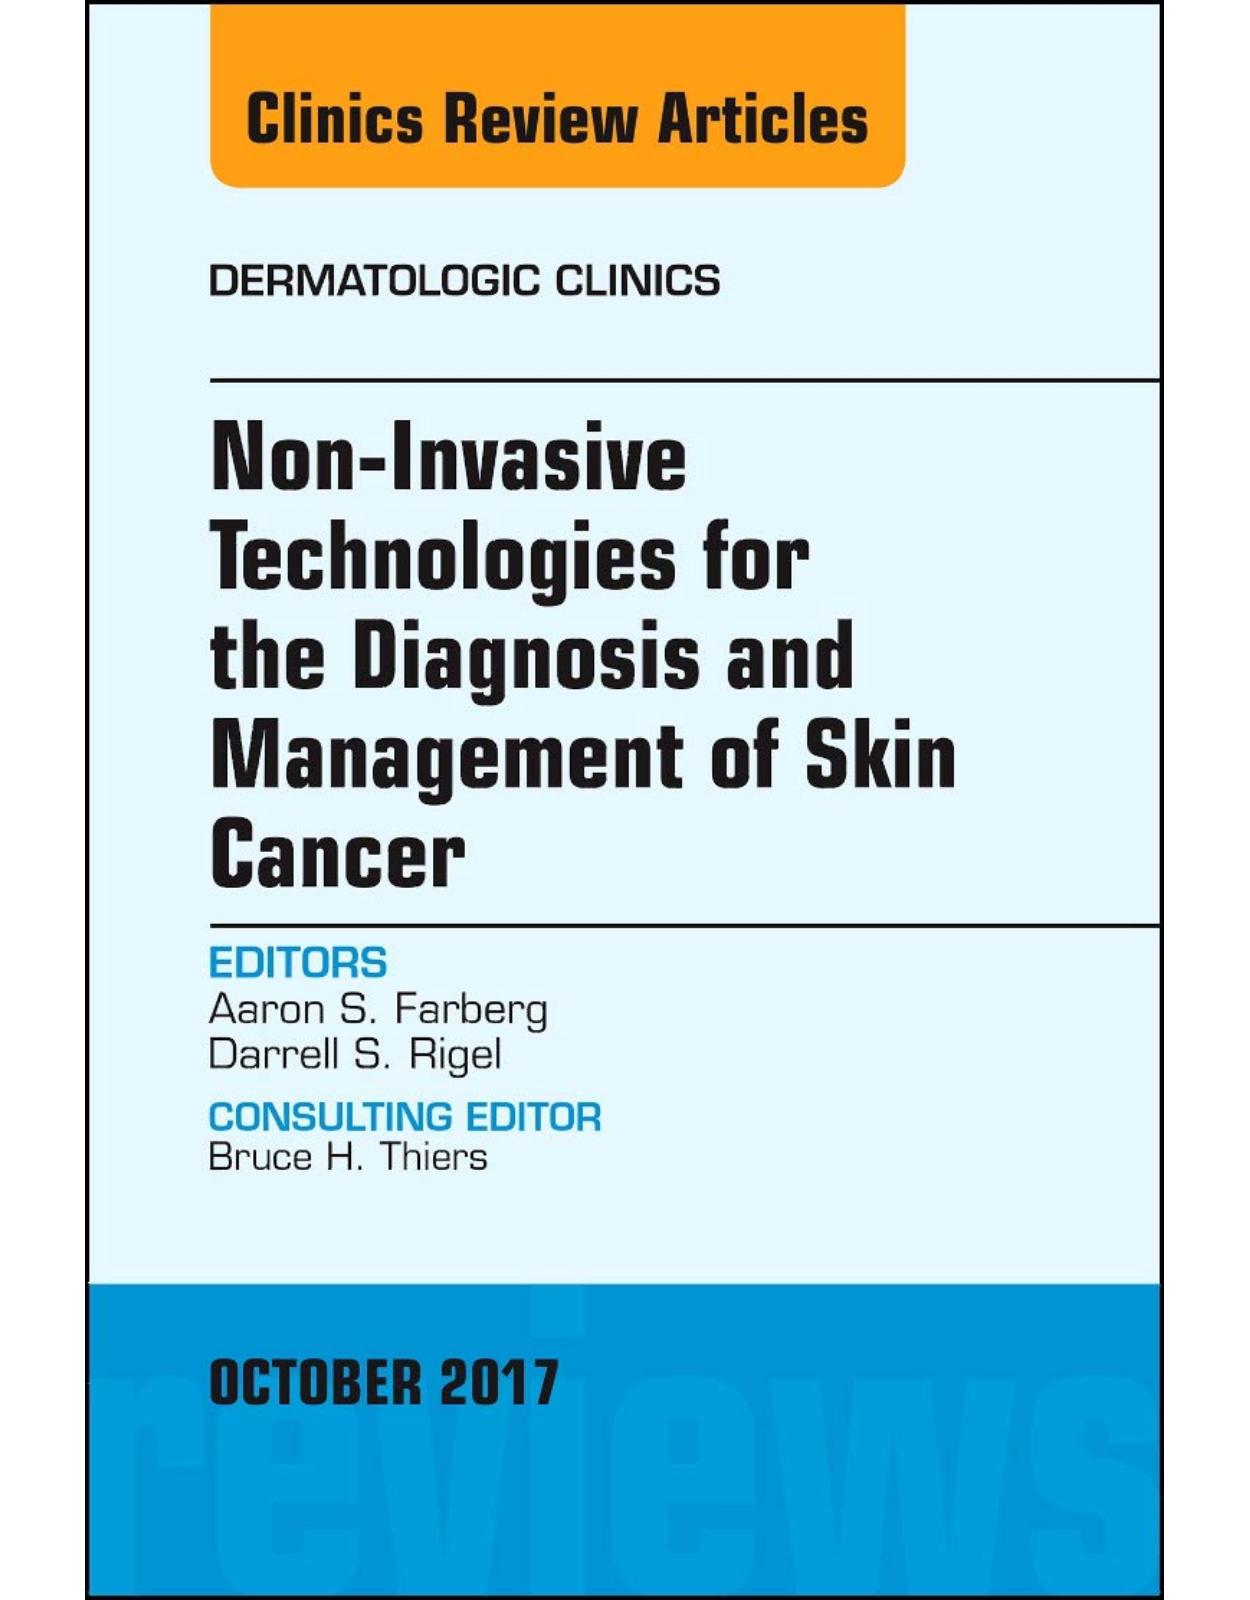 Non-Invasive Technologies for the Diagnosis and Management of Skin Cancer, An Issue of Dermatologic Clinics, Volume 35-4